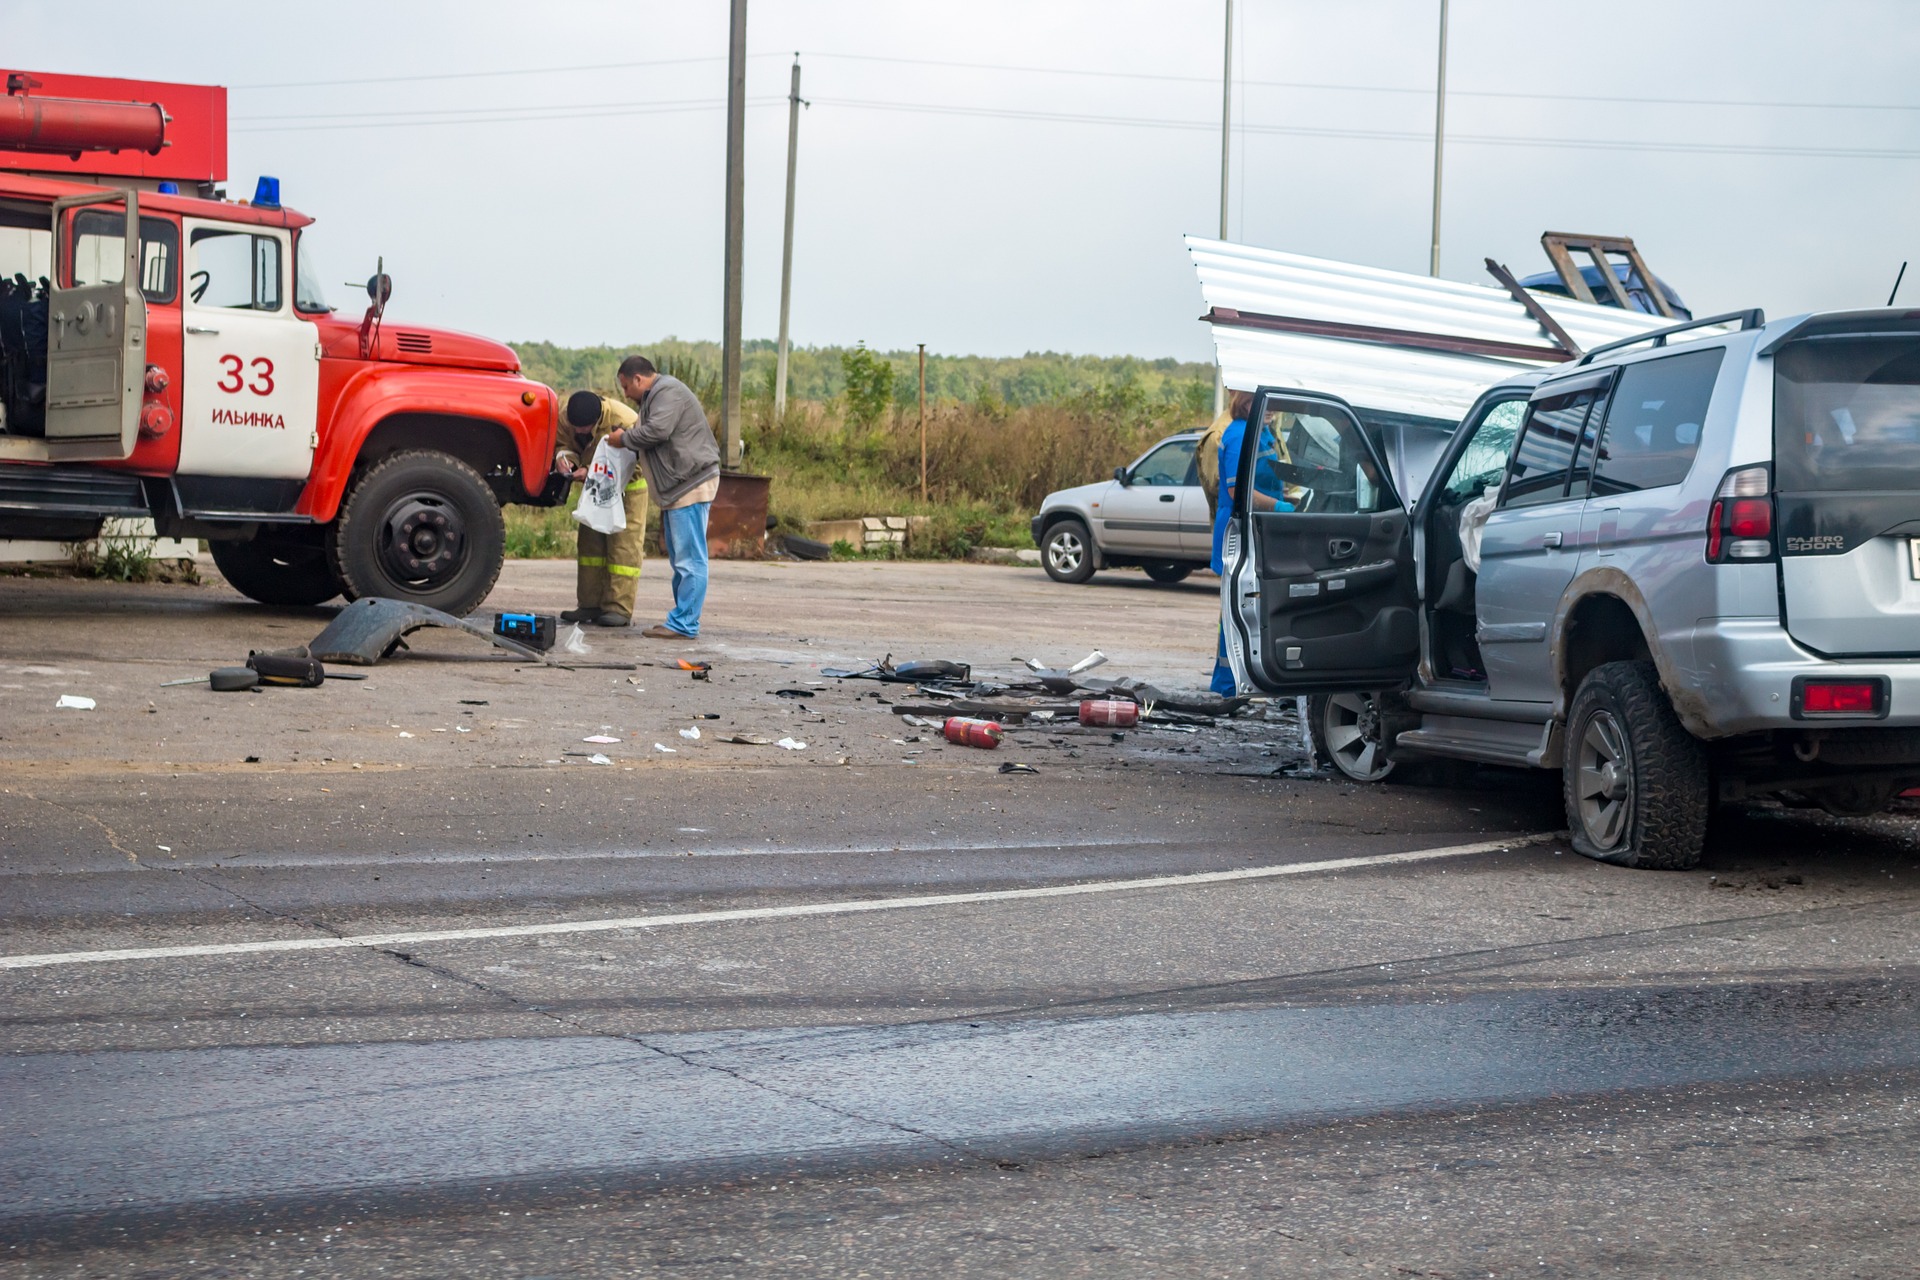 Common Injuries Resulting from Car Accidents